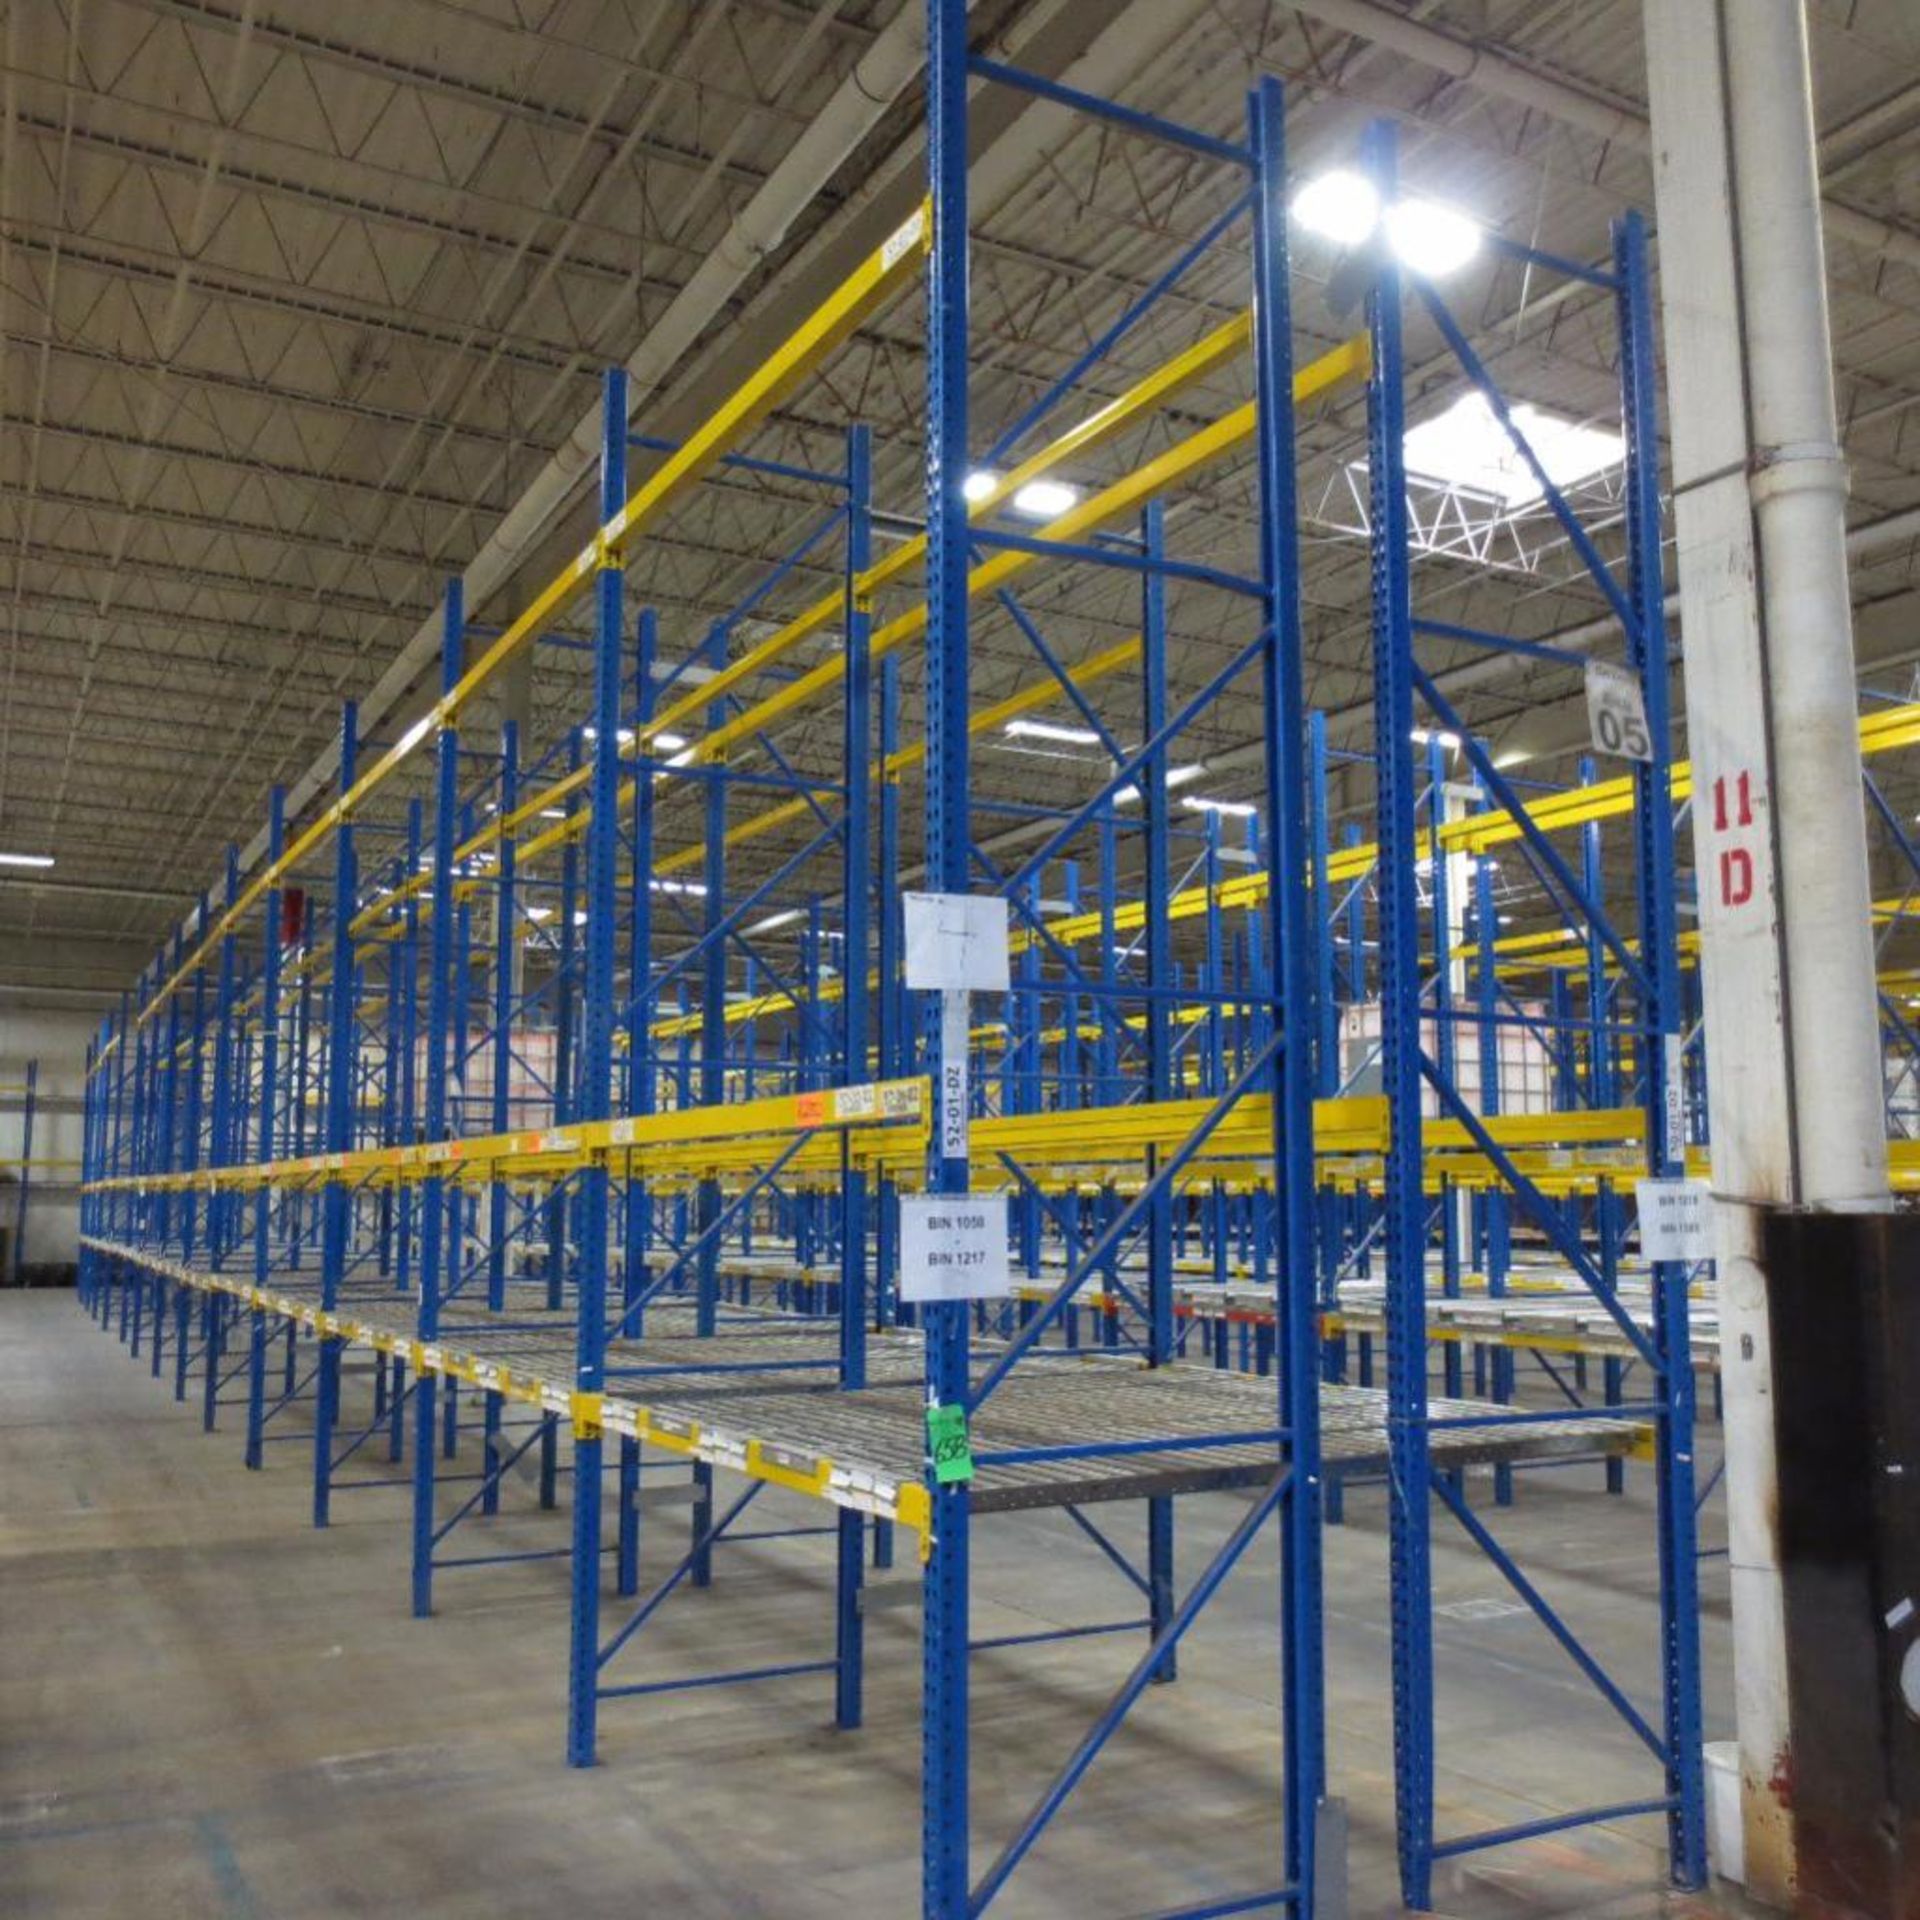 (28) Section of Pallet Racking, (30) Legs 16' X 42", Apx. 135 Cross Beams 8', (70) Pallet Roller Con